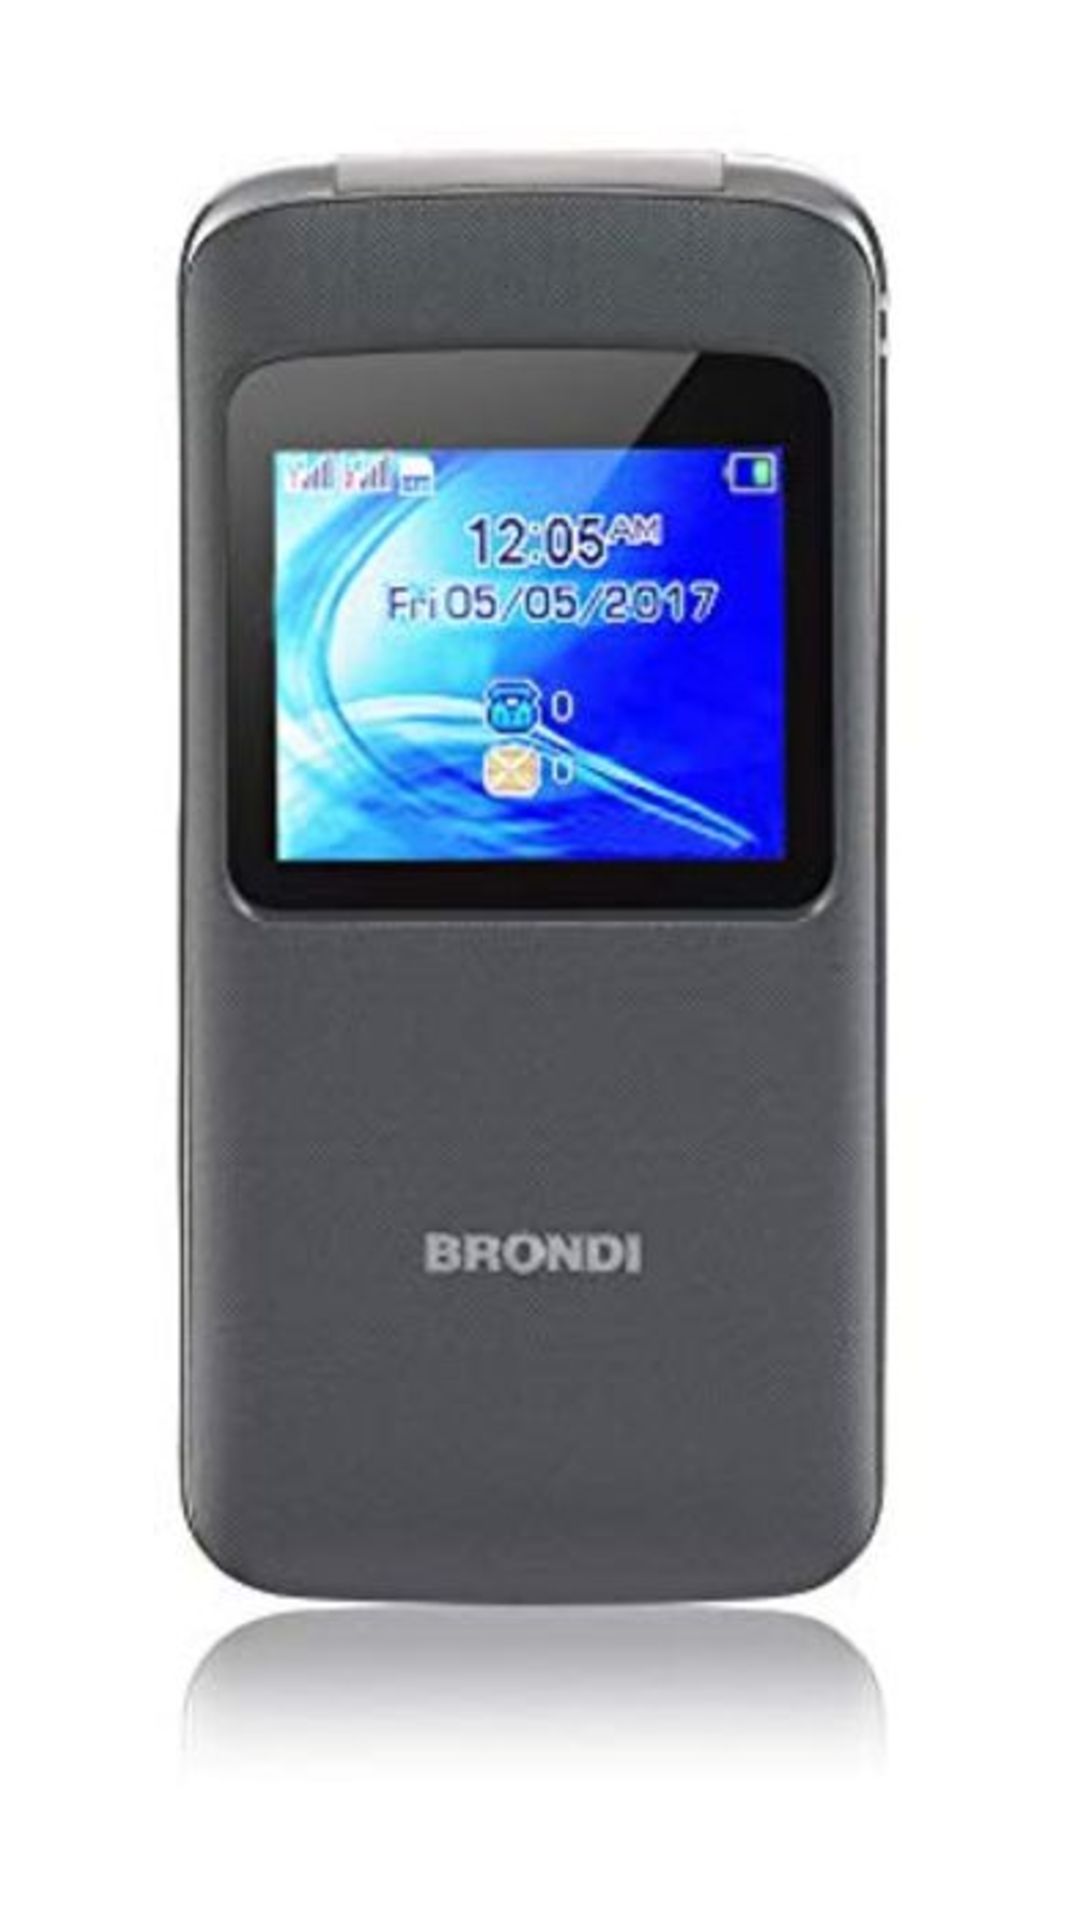 Brondi Window 1.77 "78 g Grey Feature of the phone - Mobile phone (Clamshell, Dual